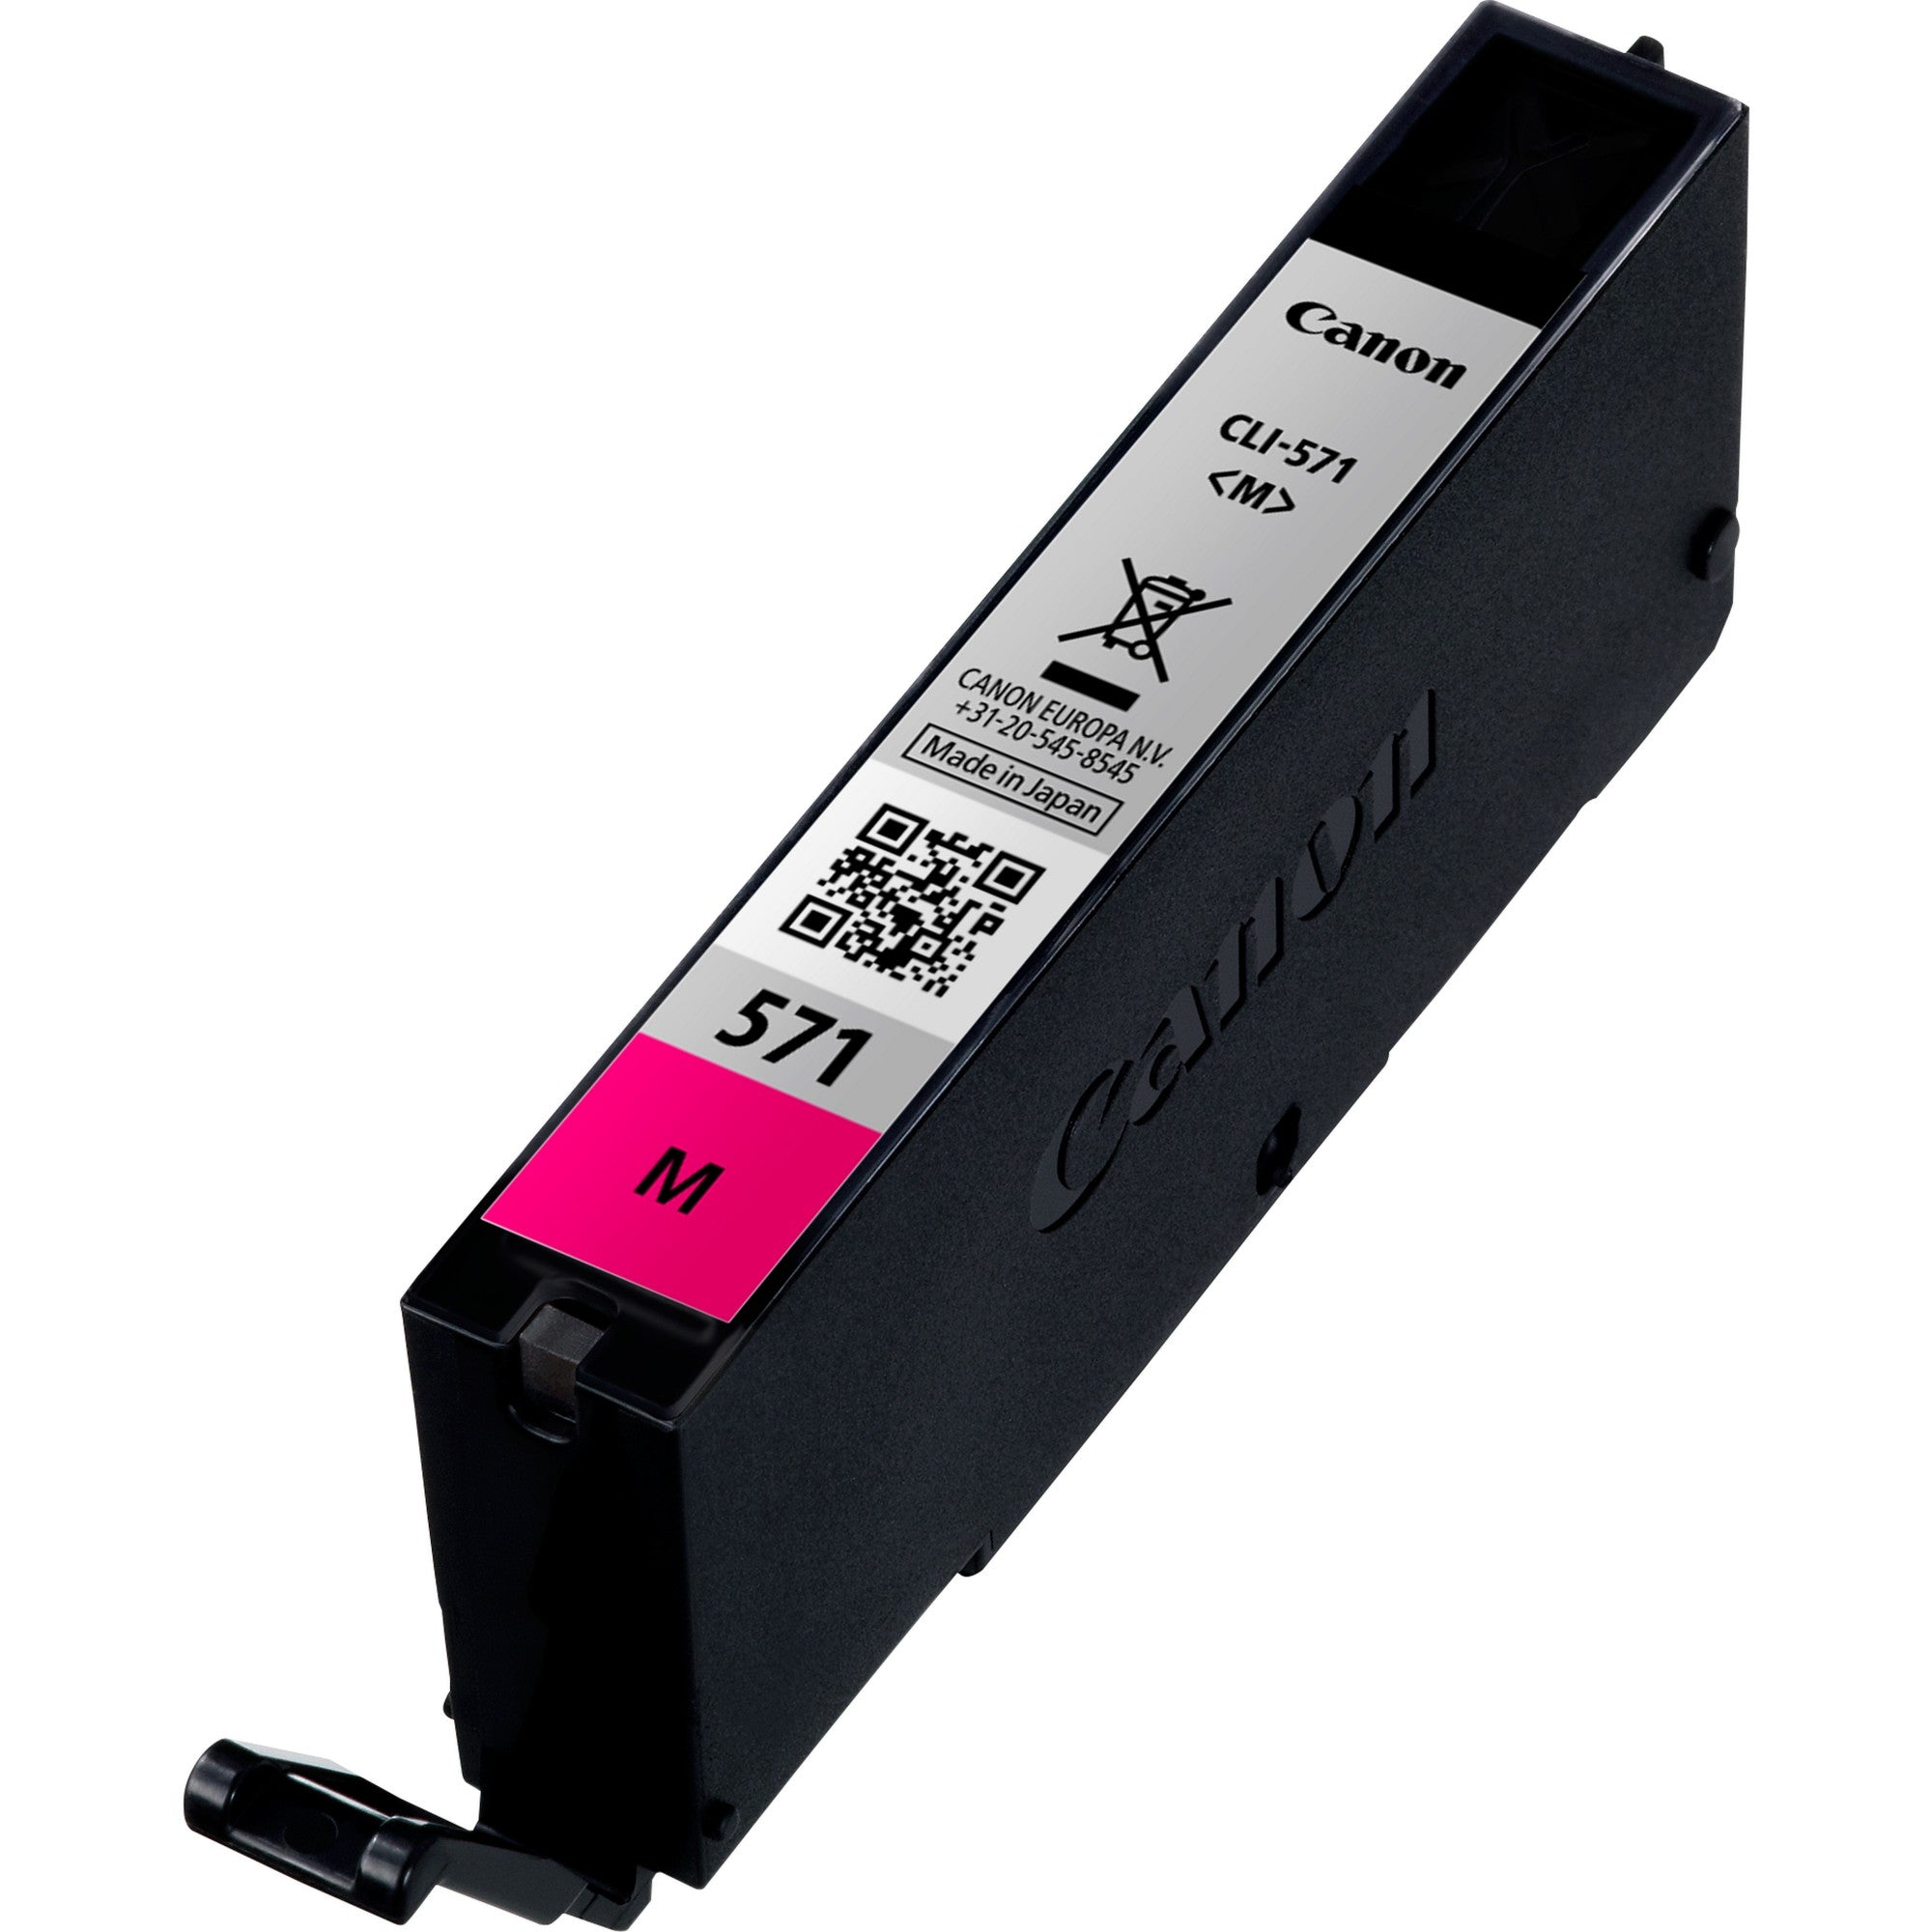 Canon 0387C001/CLI-571M Ink cartridge magenta, 297 pages ISO/IEC 24711 182 Photos 6.5ml for Canon Pixma MG 5750/7750